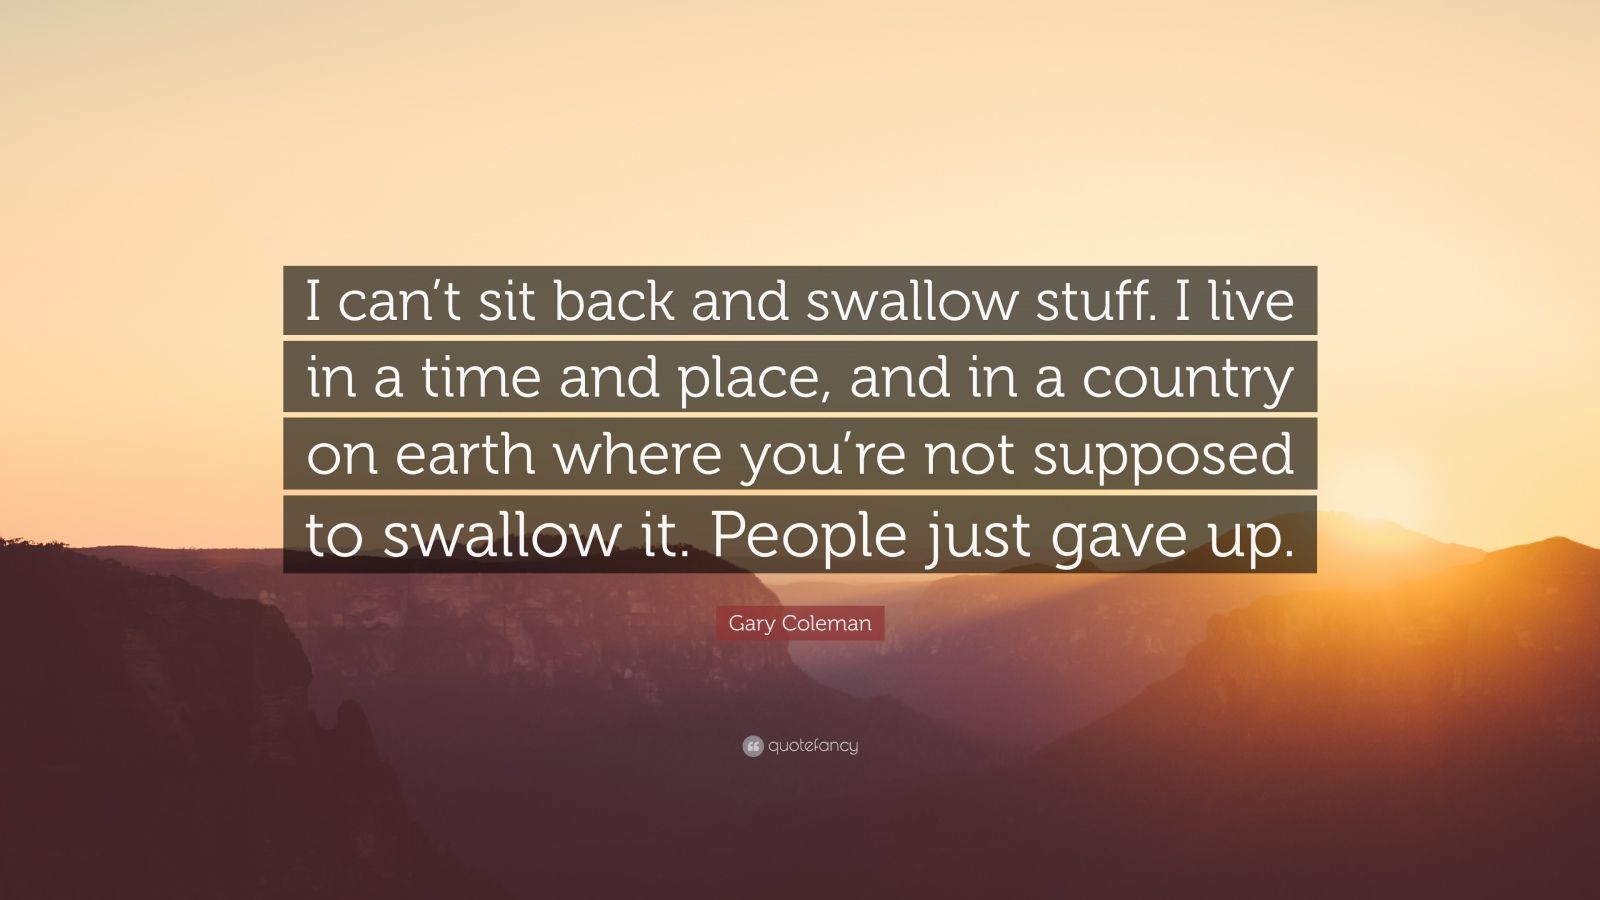 Gary Coleman Quote: "I can't sit back and swallow stuff. I ...